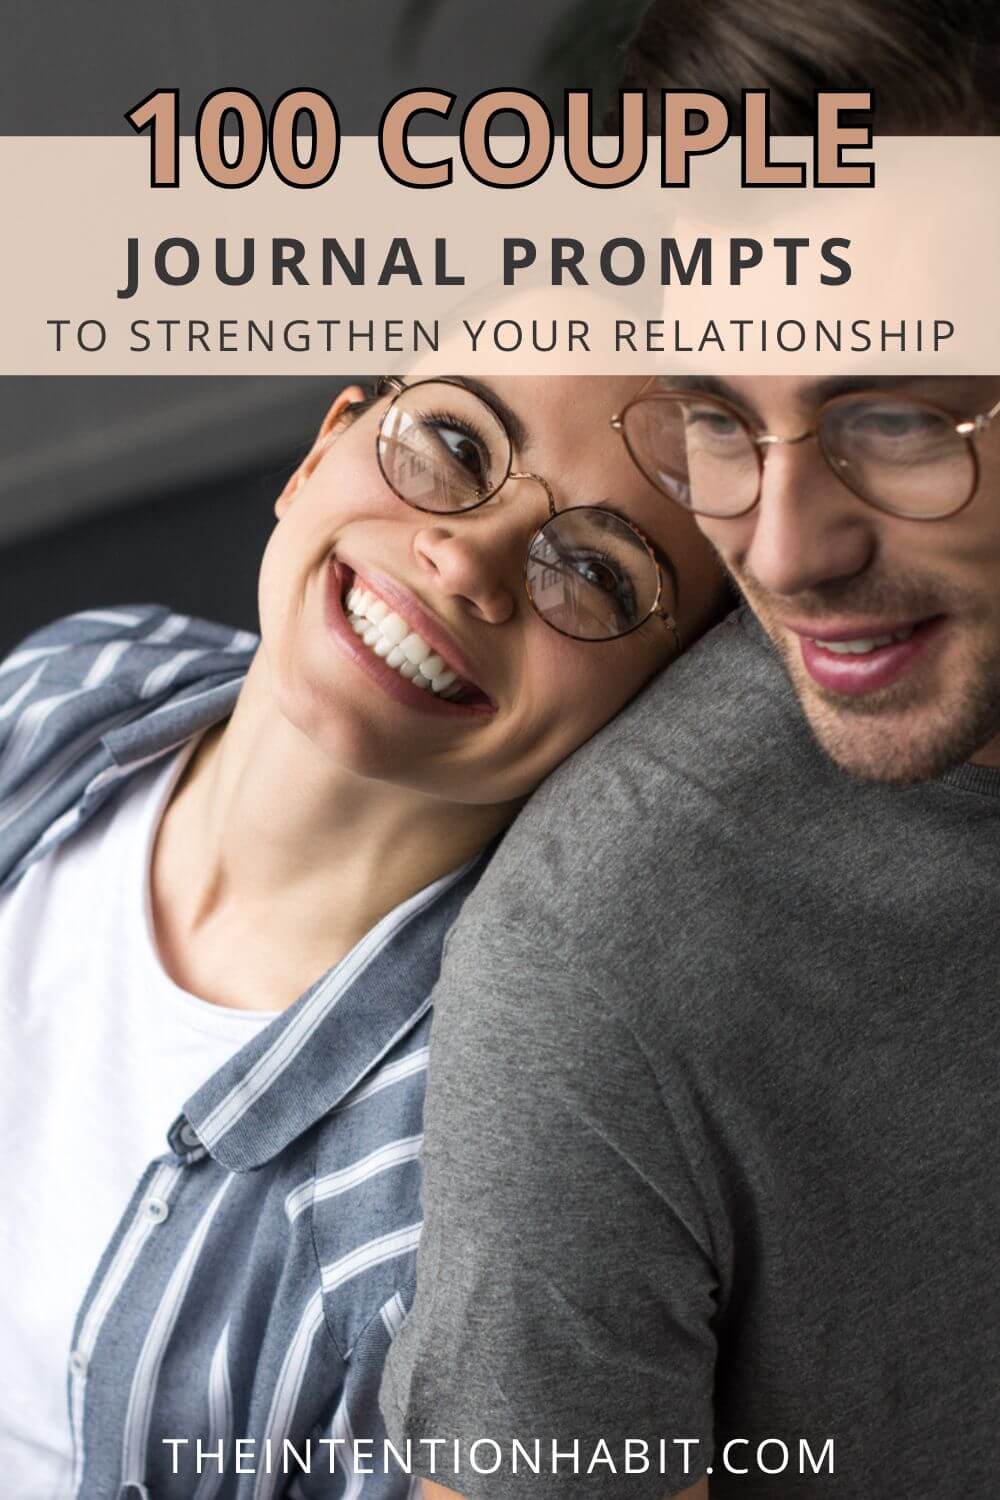 100 couple journal prompts to strengthen your bond.